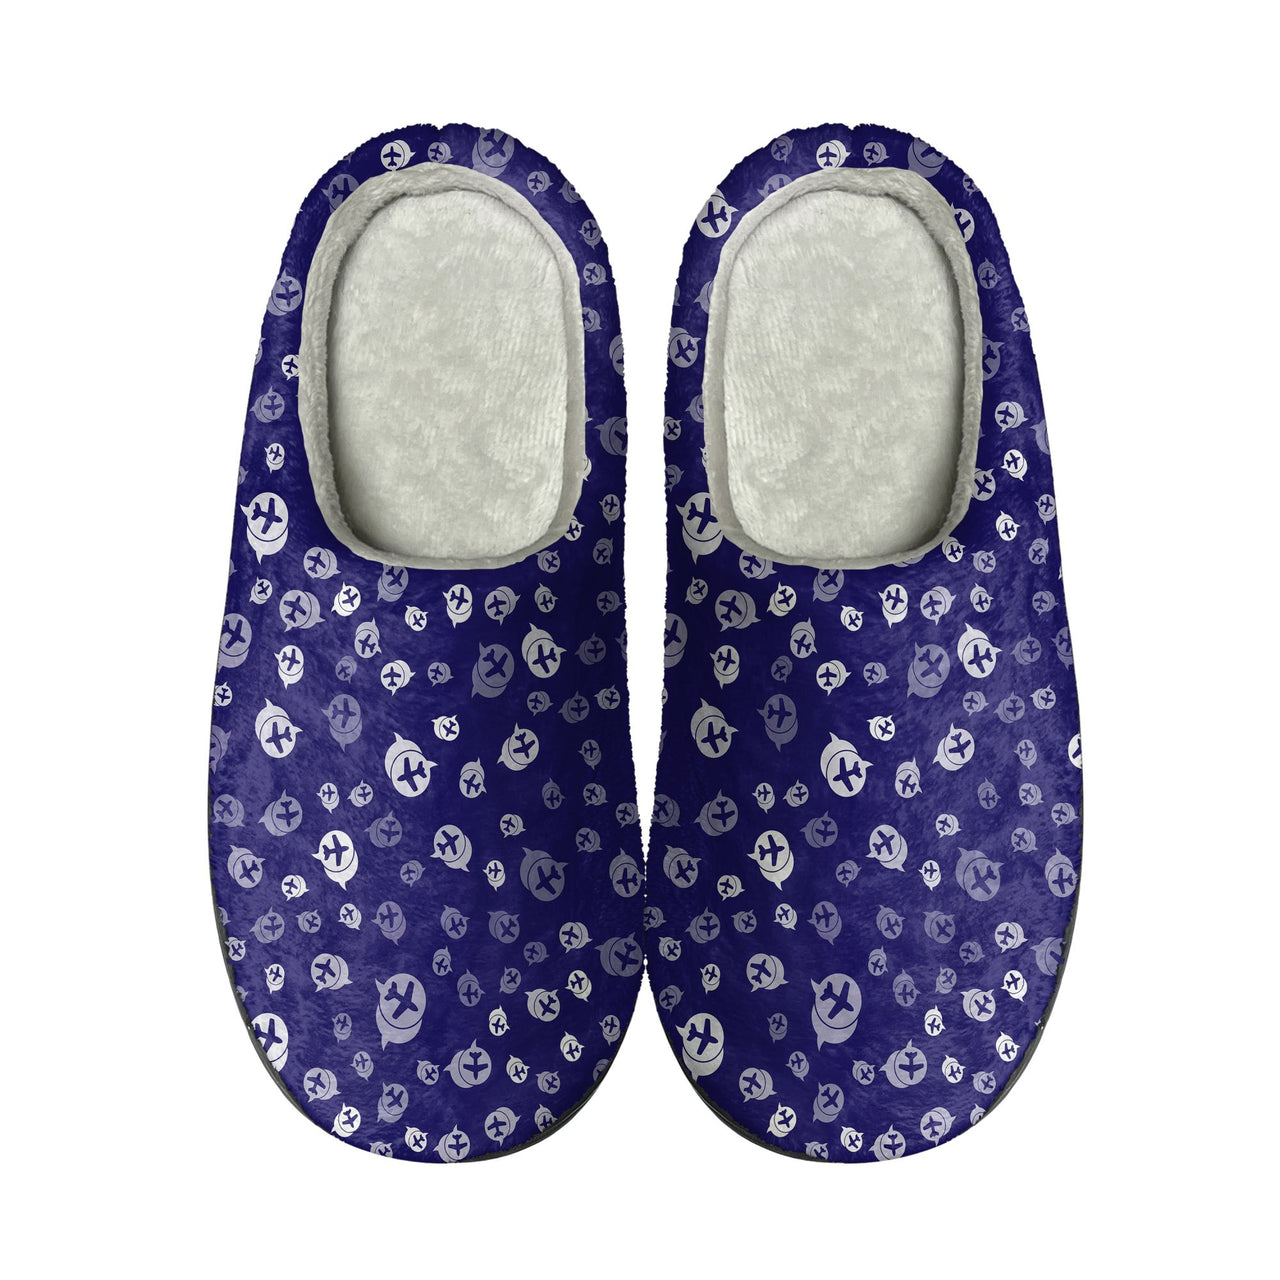 Airplane Notification Theme Designed Cotton Slippers